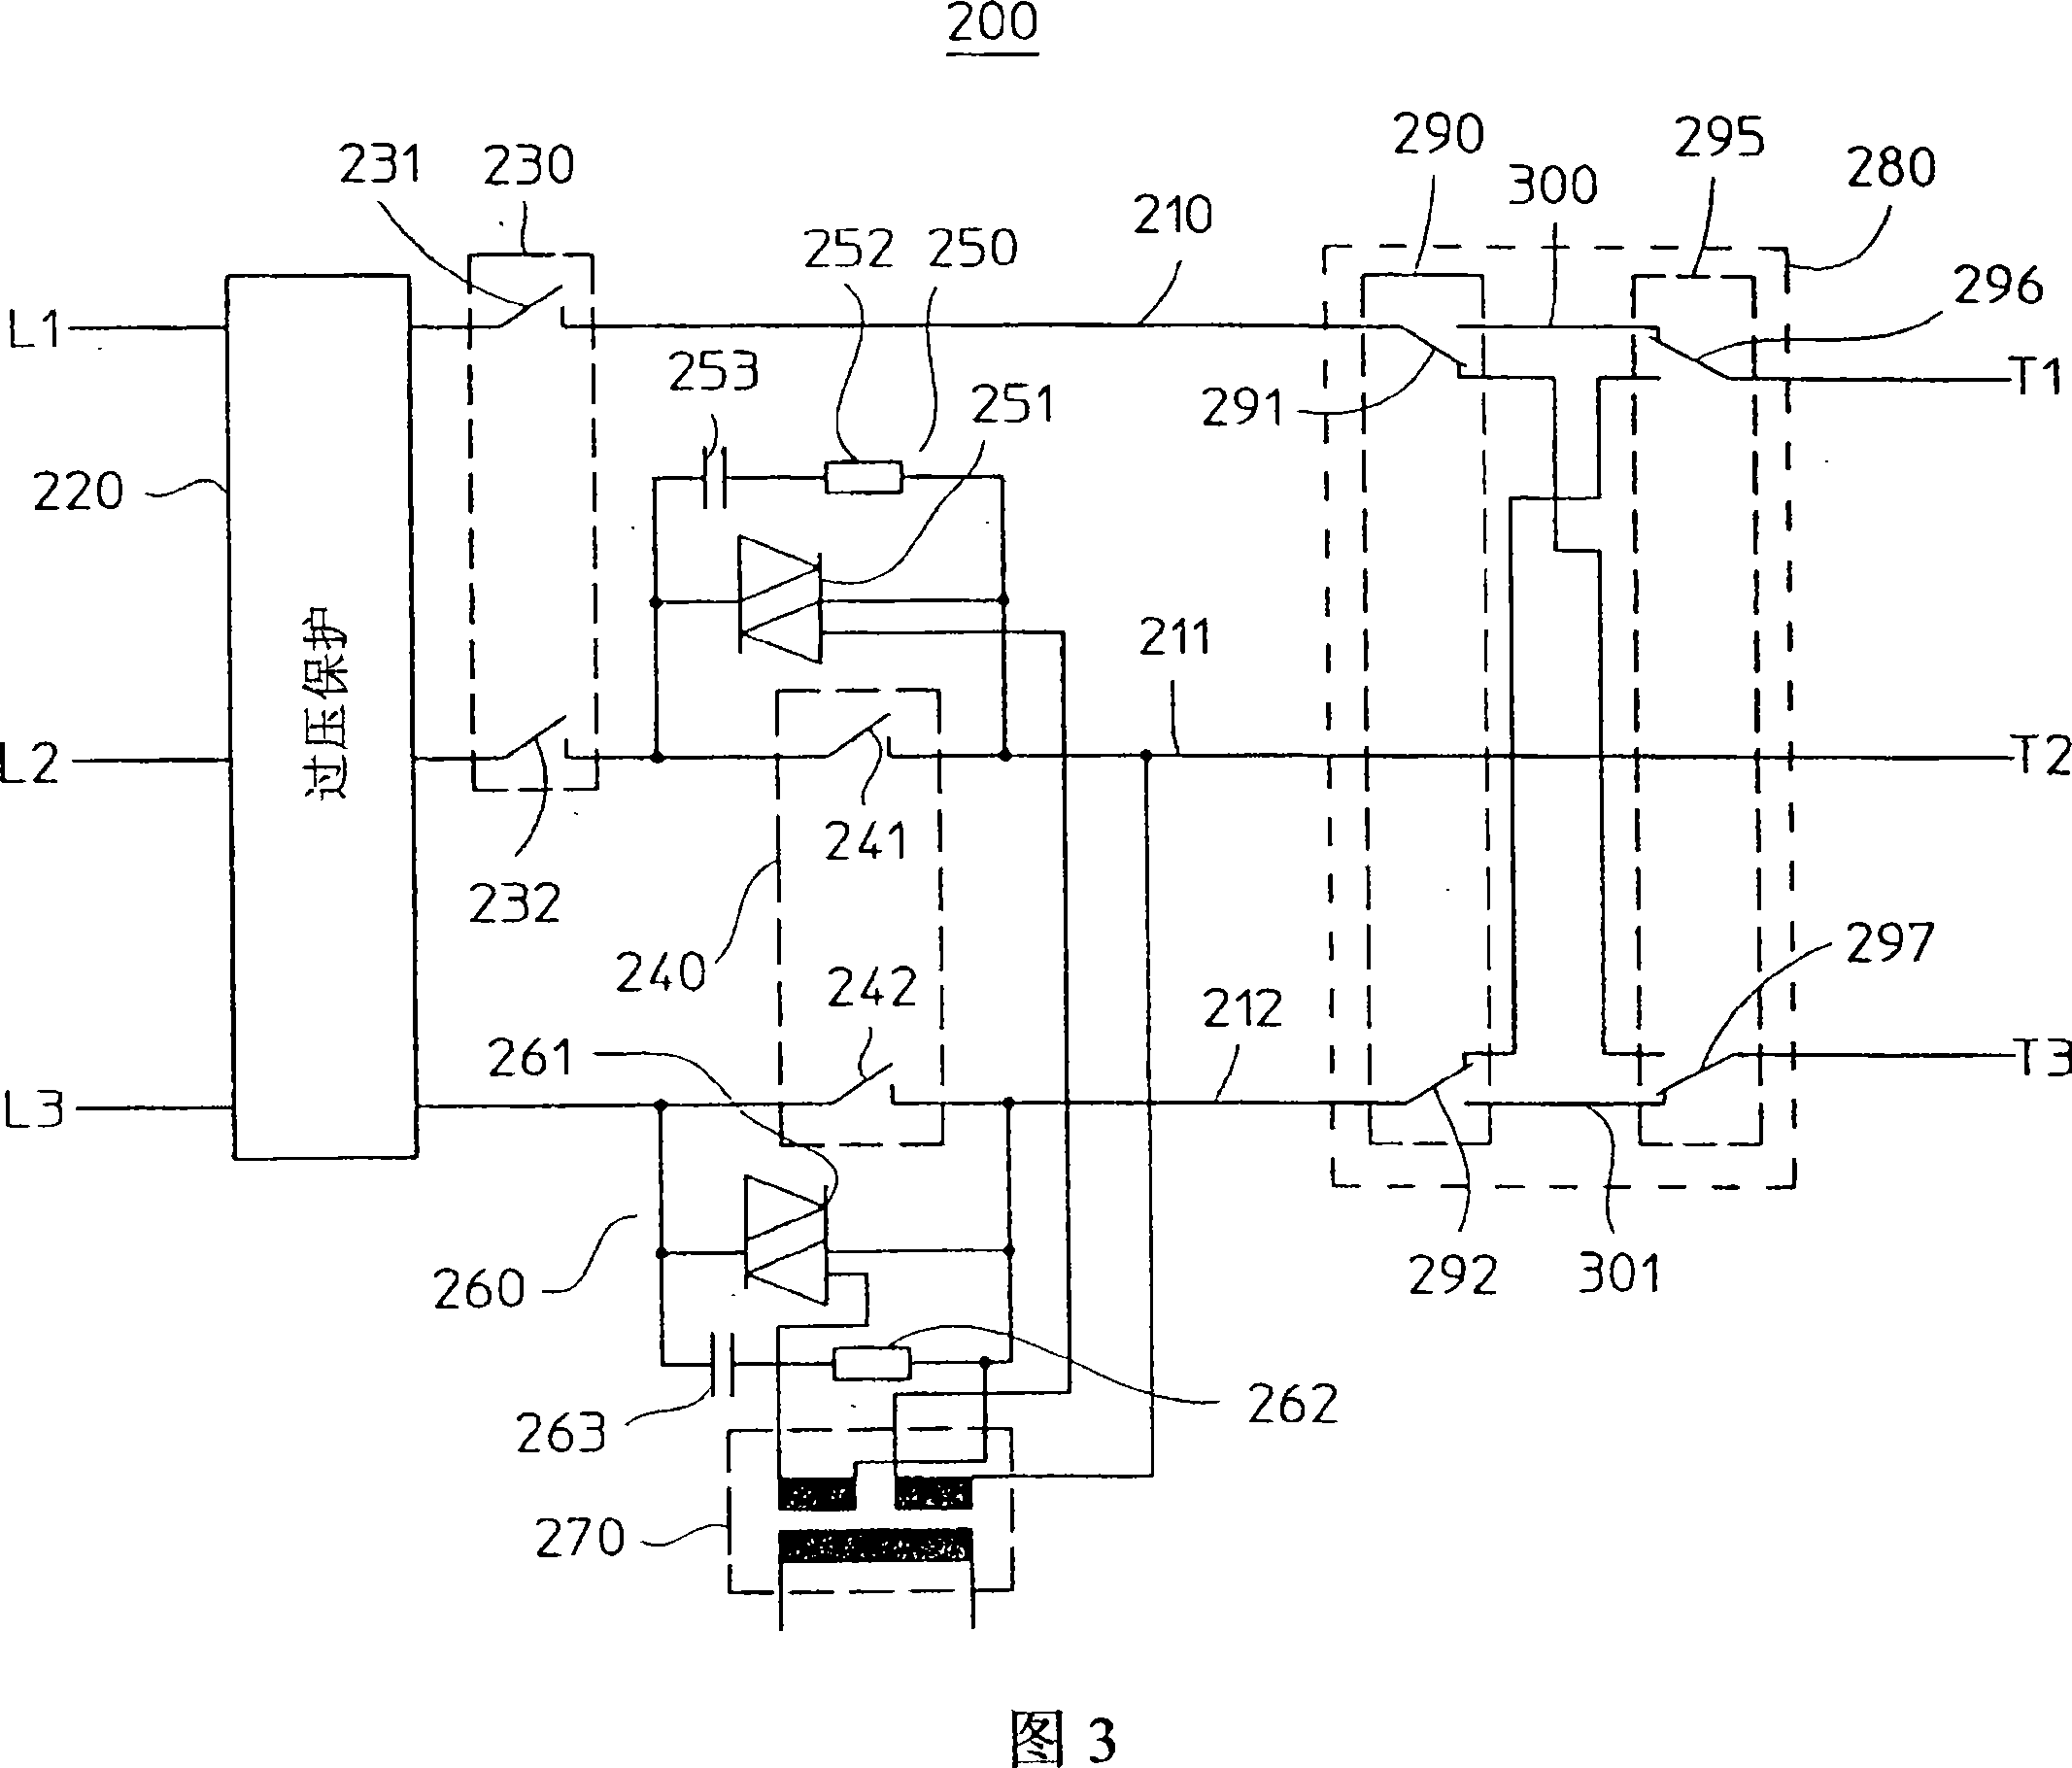 Safety switching unit for controlling a safety device into a safe state